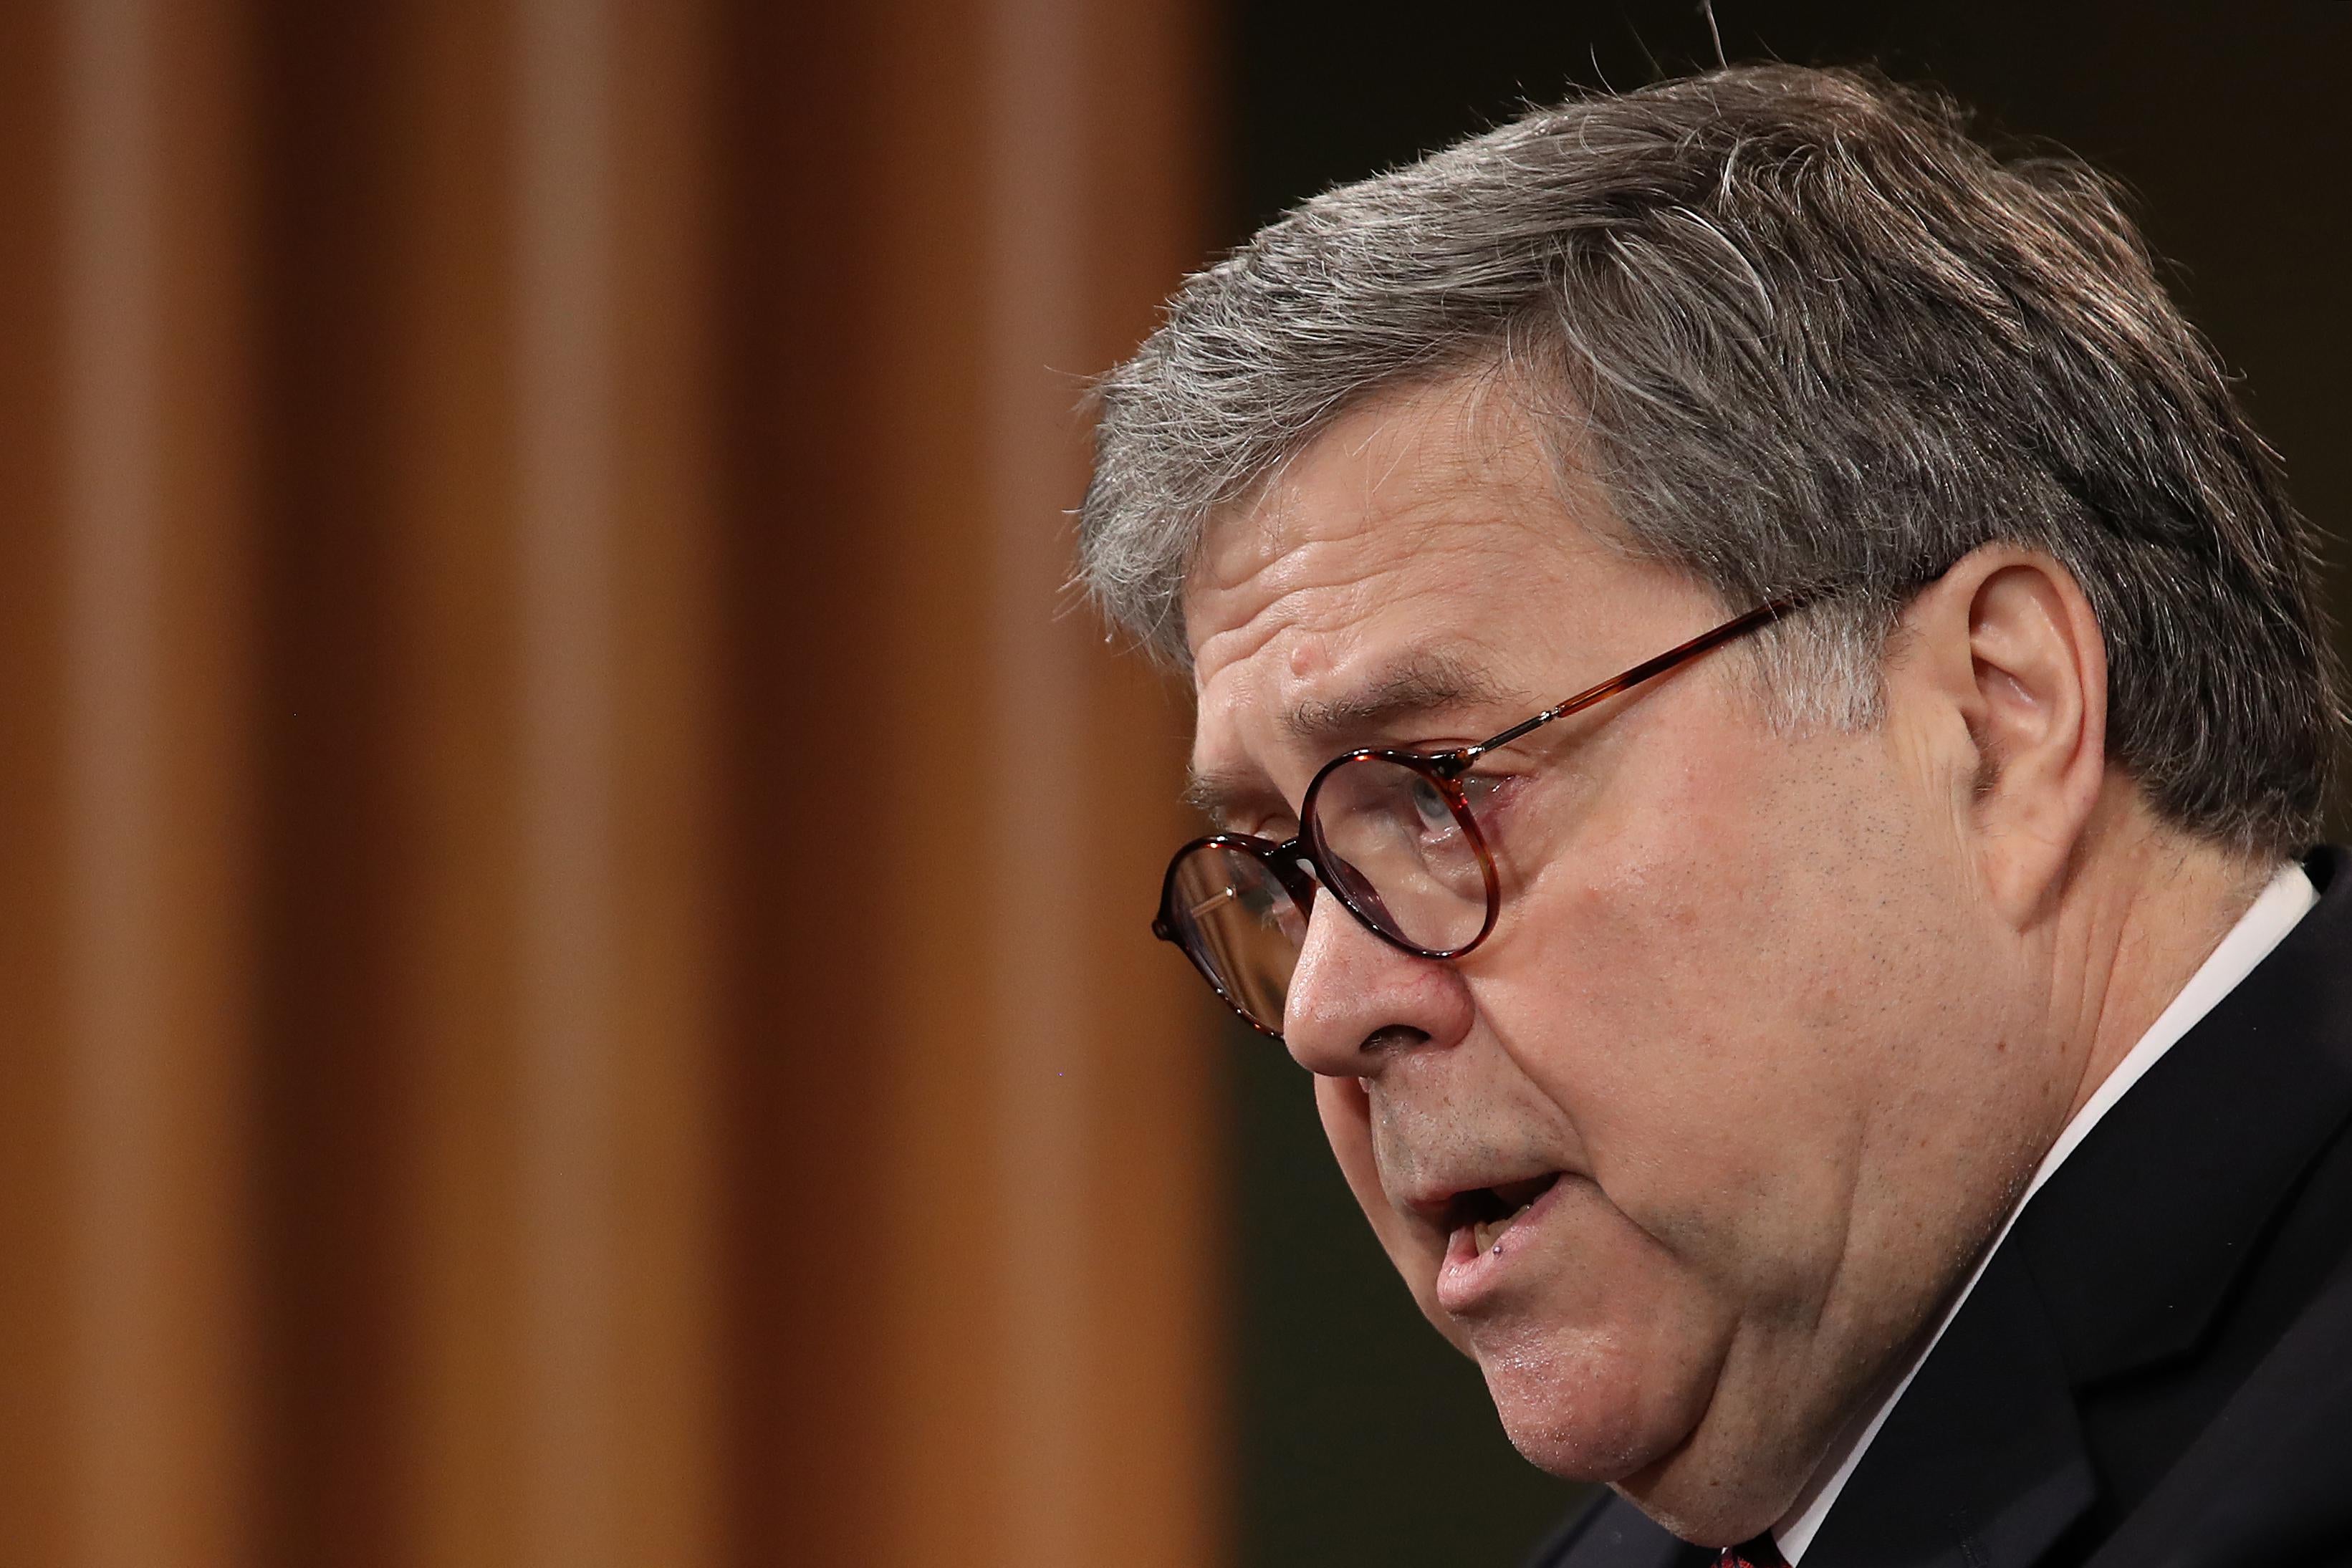 Attorney General William Barr speaks during a press conference on the release of the redacted version of the Mueller report at the Department of Justice on Thursday in Washington.